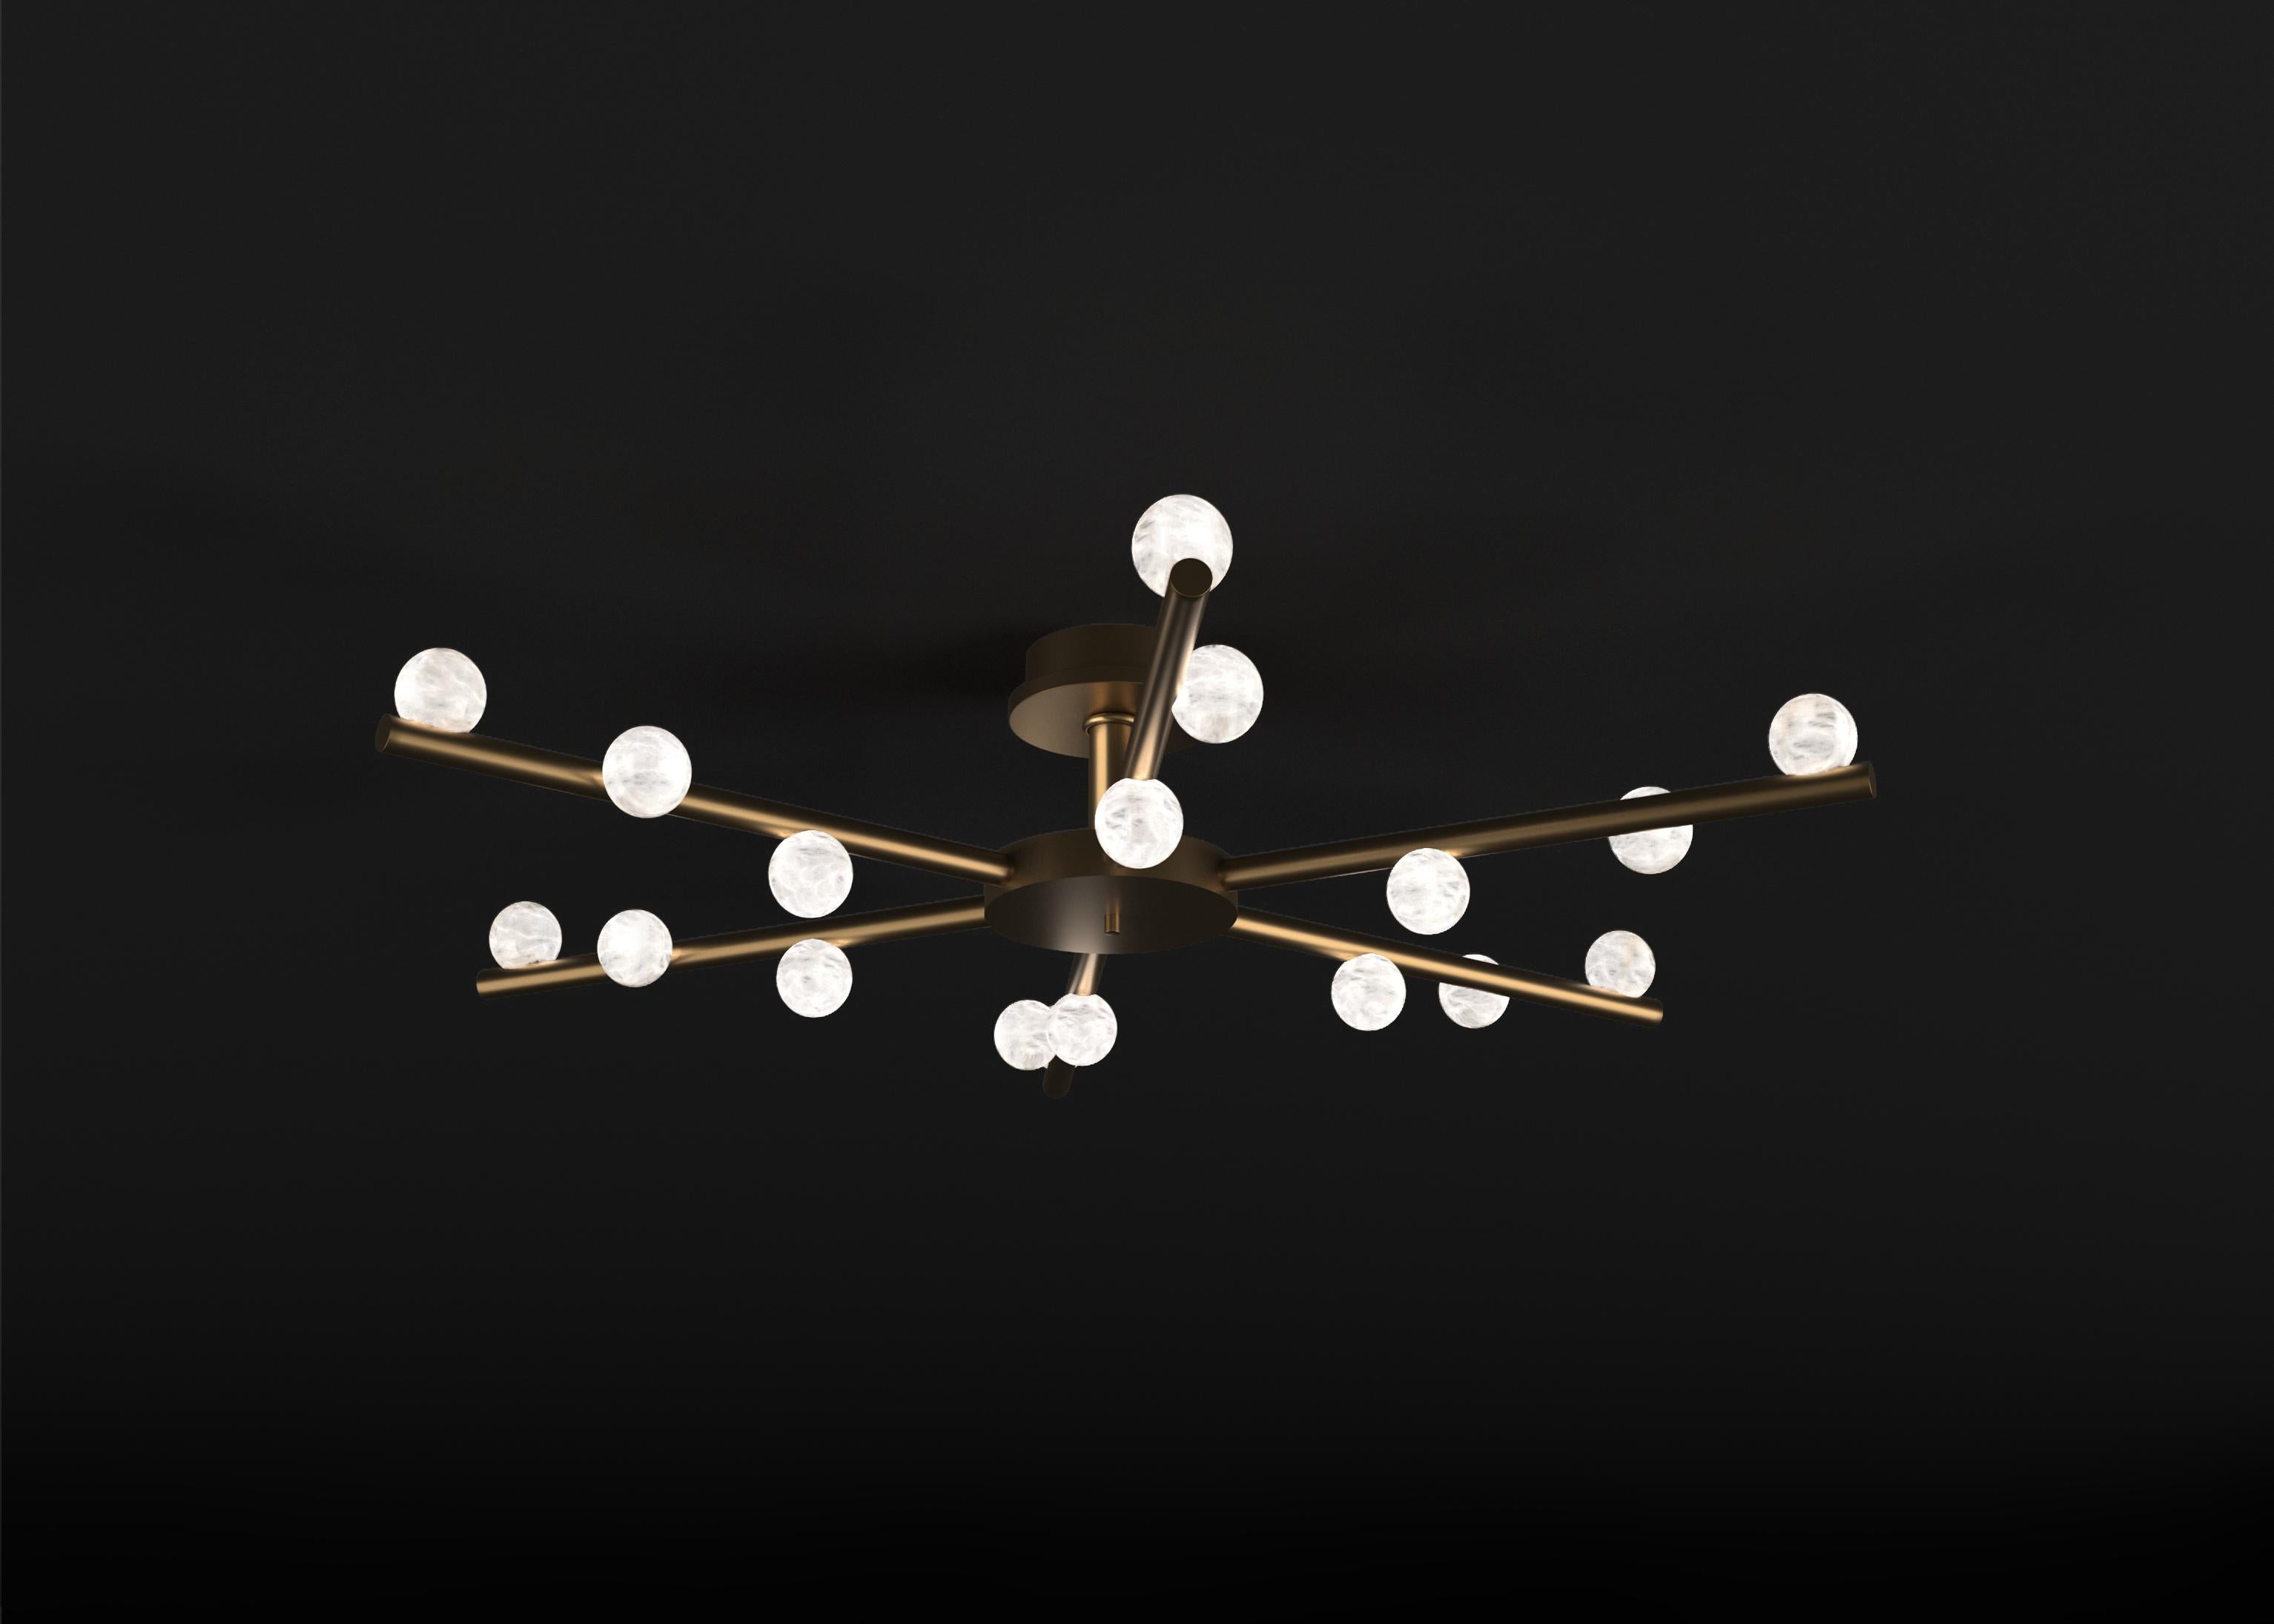 Demetra Bronze Ceiling Lamp by Alabastro Italiano
Dimensions: D 85 x W 97 x H 22 cm.
Materials: White alabaster and bronze.

Available in different finishes: Shiny Silver, Bronze, Brushed Brass, Ruggine of Florence, Brushed Burnished, Shiny Gold,